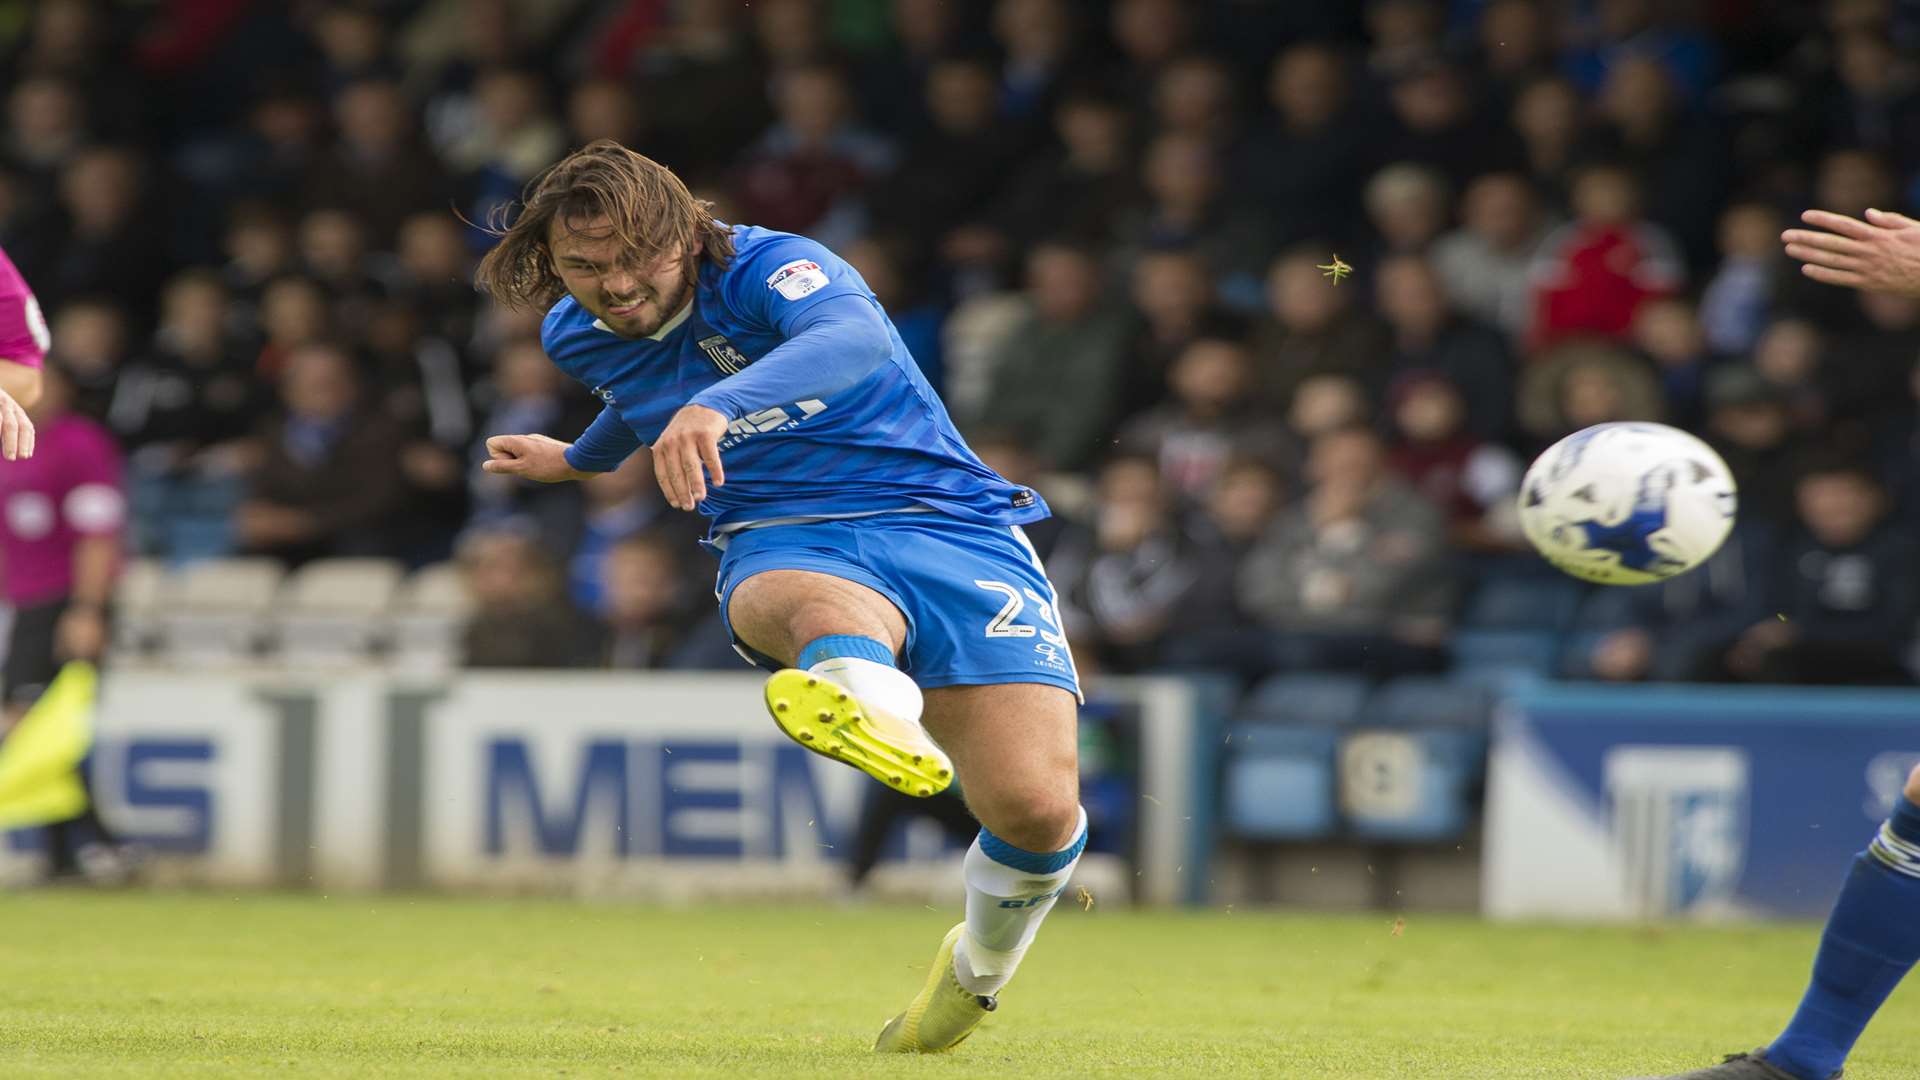 Bradley Dack in action for the Gills Picture: Andy Payton